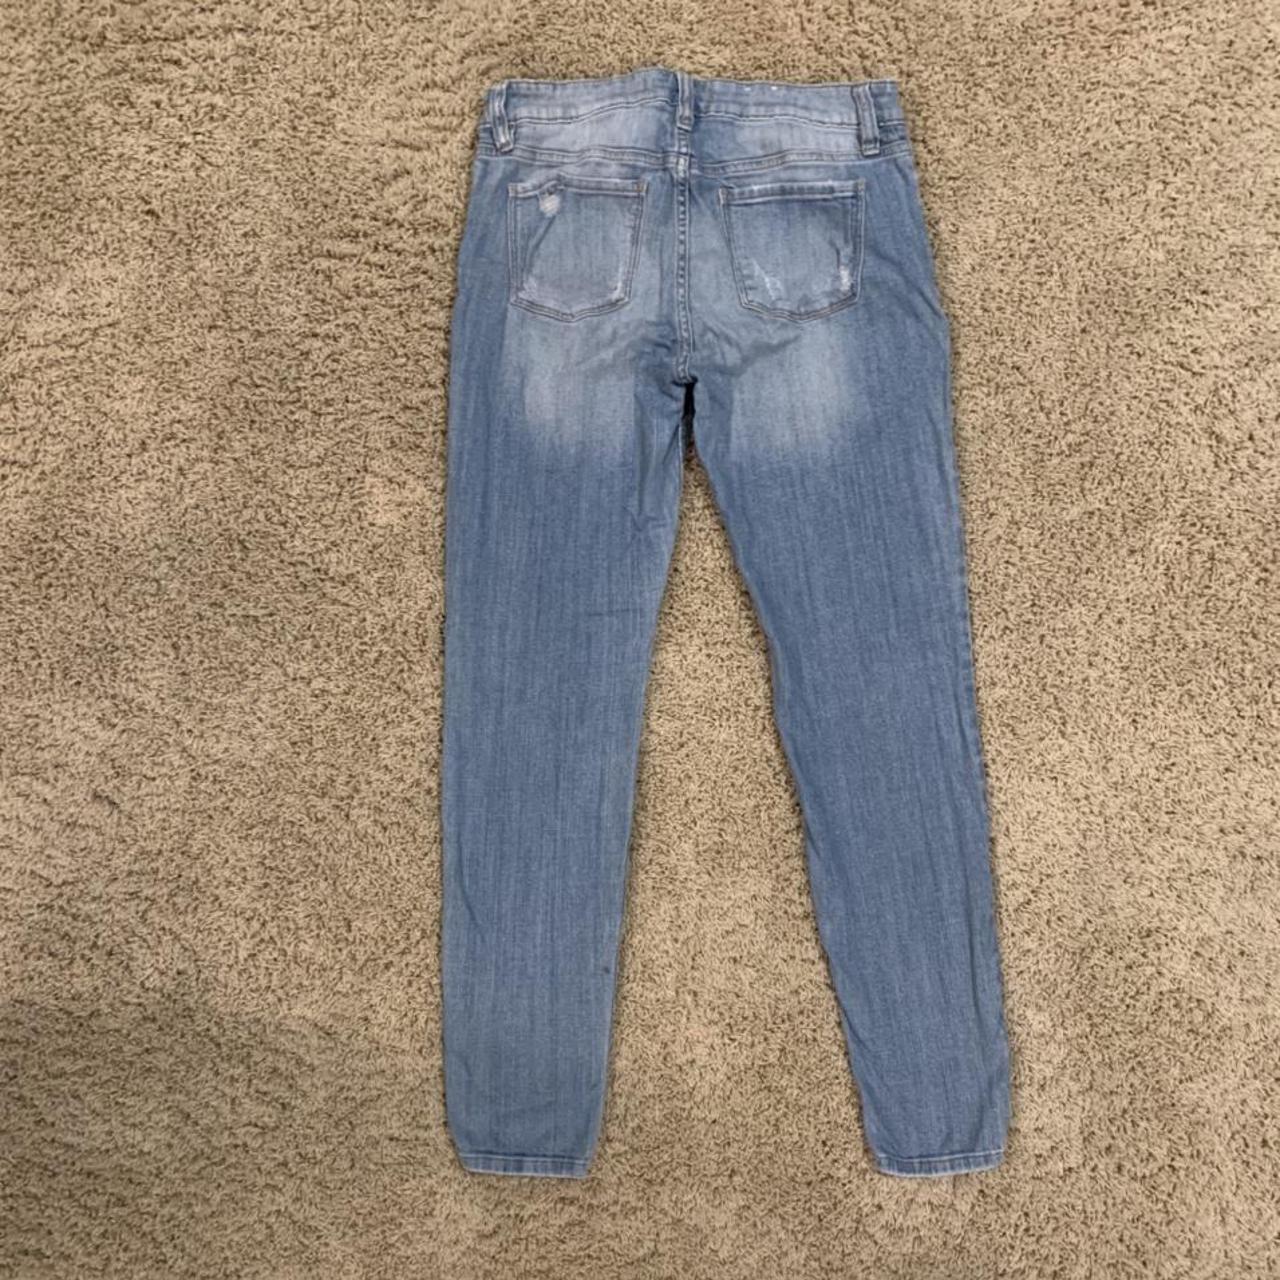 Women's Blue and White Jeans | Depop